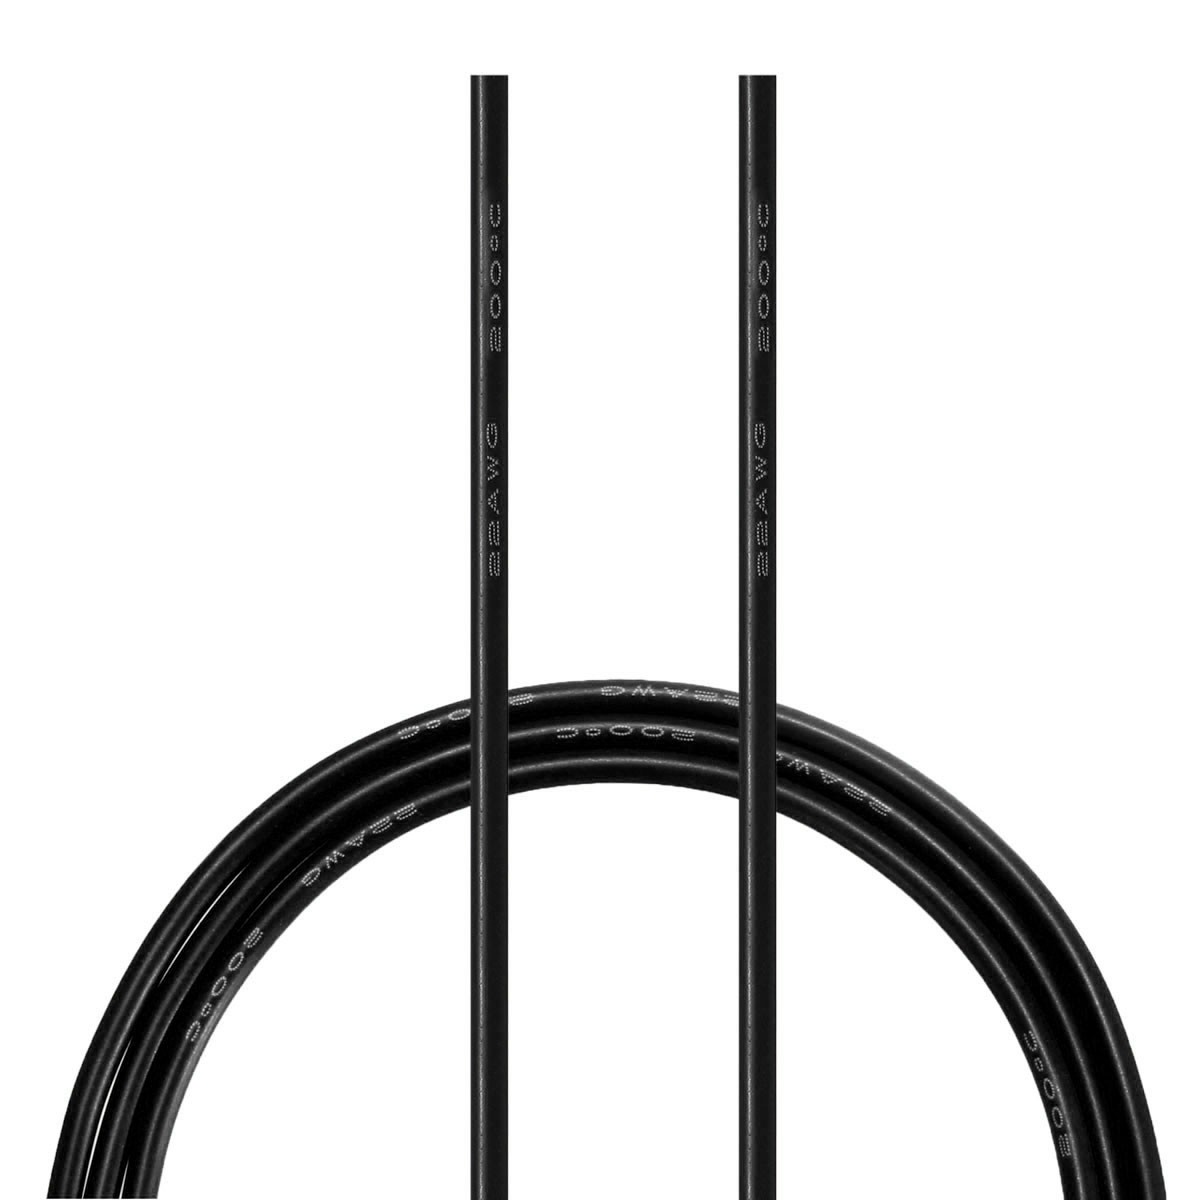 DANIU-1-Meter-Black-Silicone-Wire-Cable-10121416182022AWG-Flexible-Cable-1170273-3